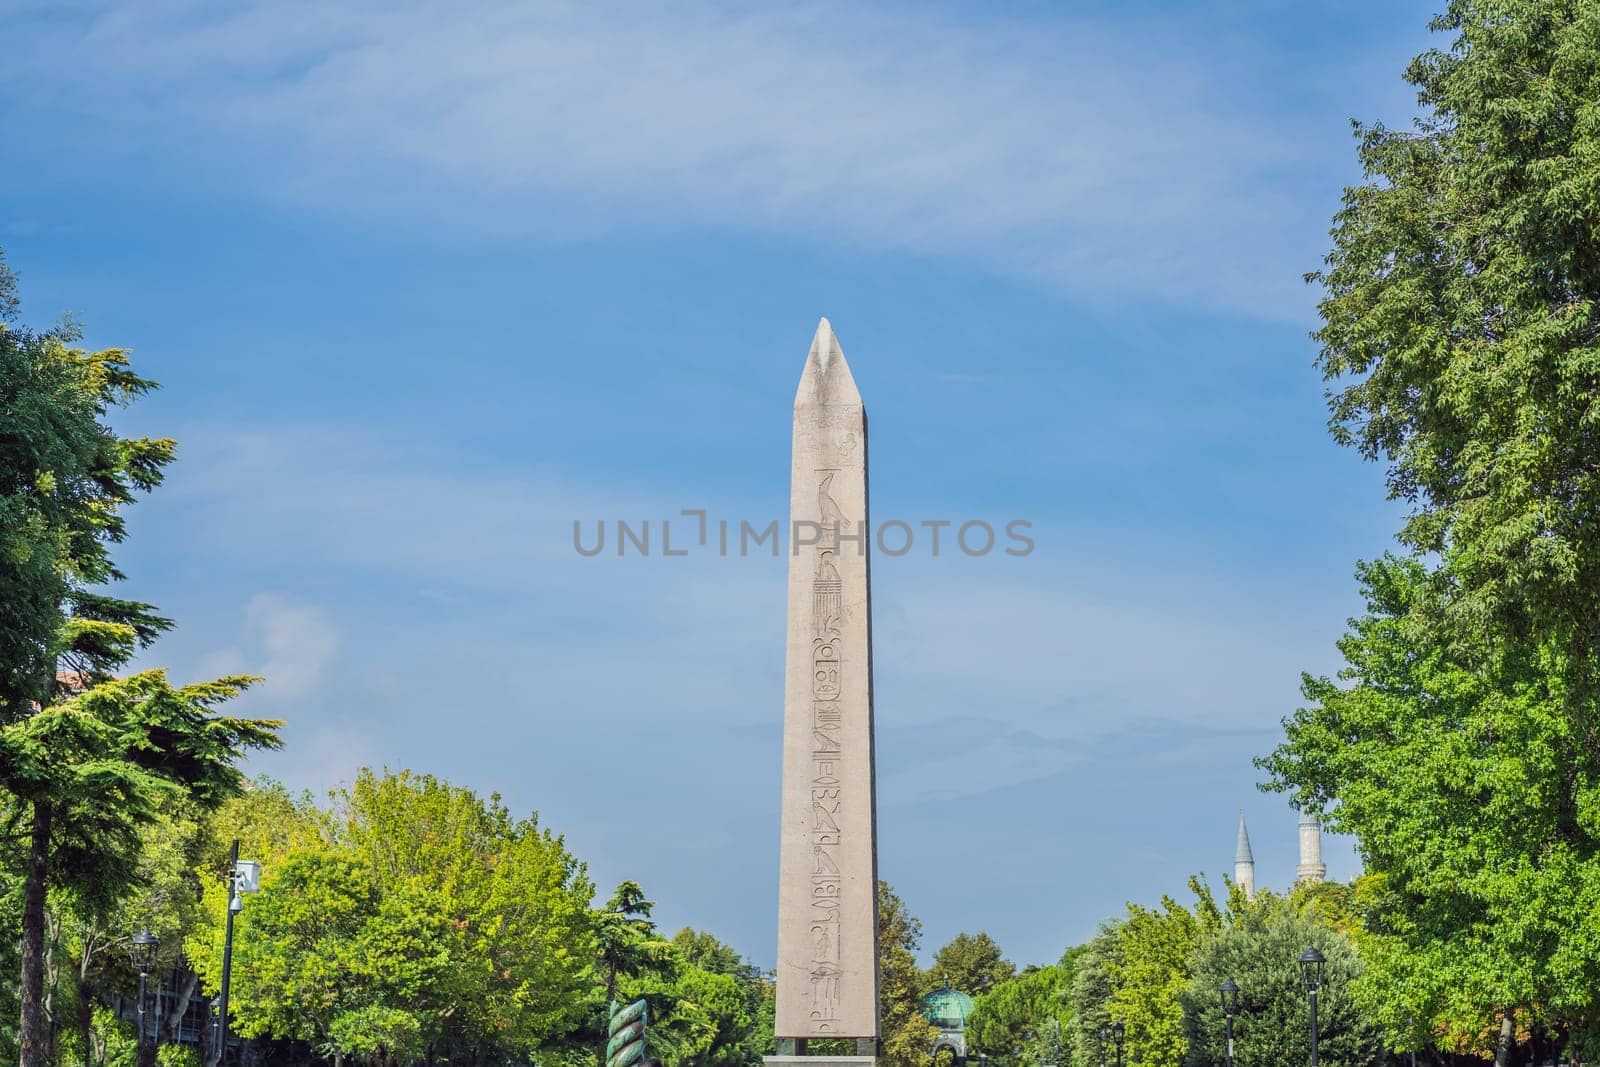 View of Obelisk of Theodosius is the Ancient Egyptian obelisk of Pharaoh Thutmose III places in the Hippodrome of Constantinople, Turkey. Theodosius Dikilitasi.